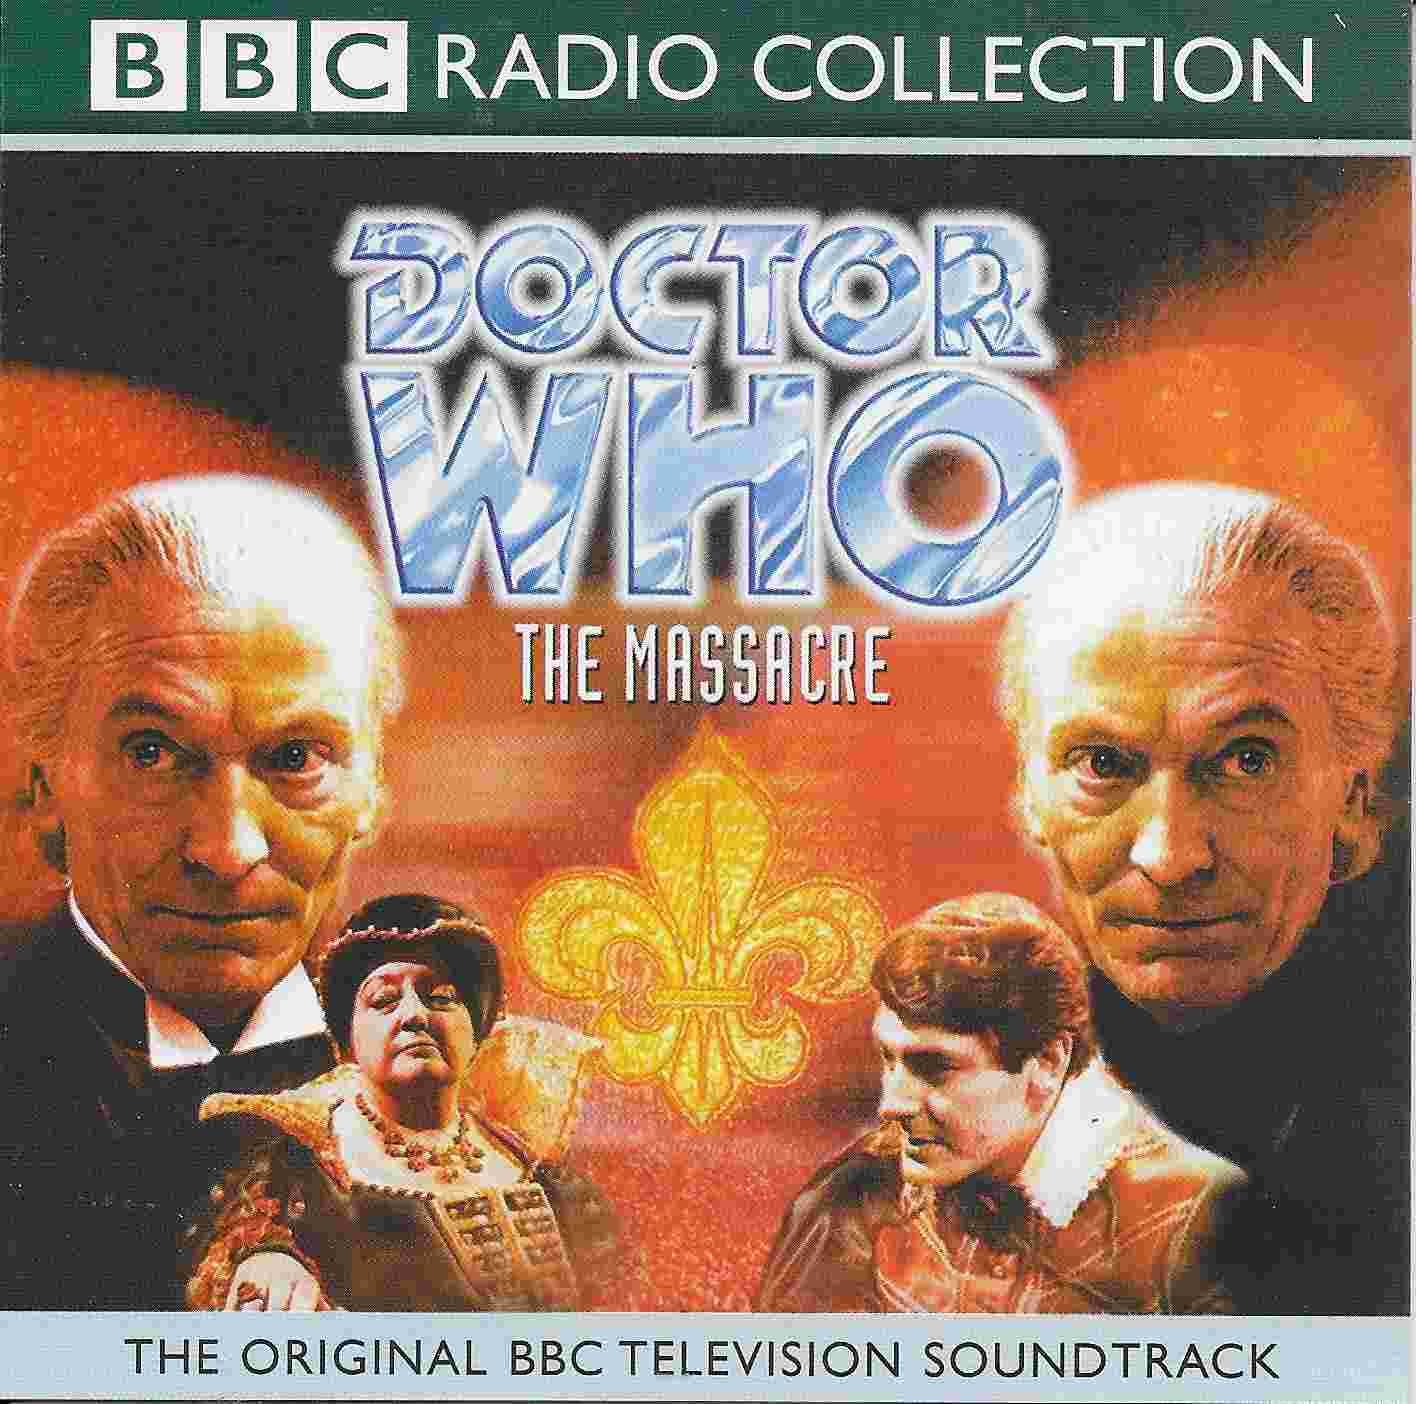 Picture of ISBN 0-563-55261-1 Doctor Who - The massacre by artist John Lucarotti from the BBC cds - Records and Tapes library